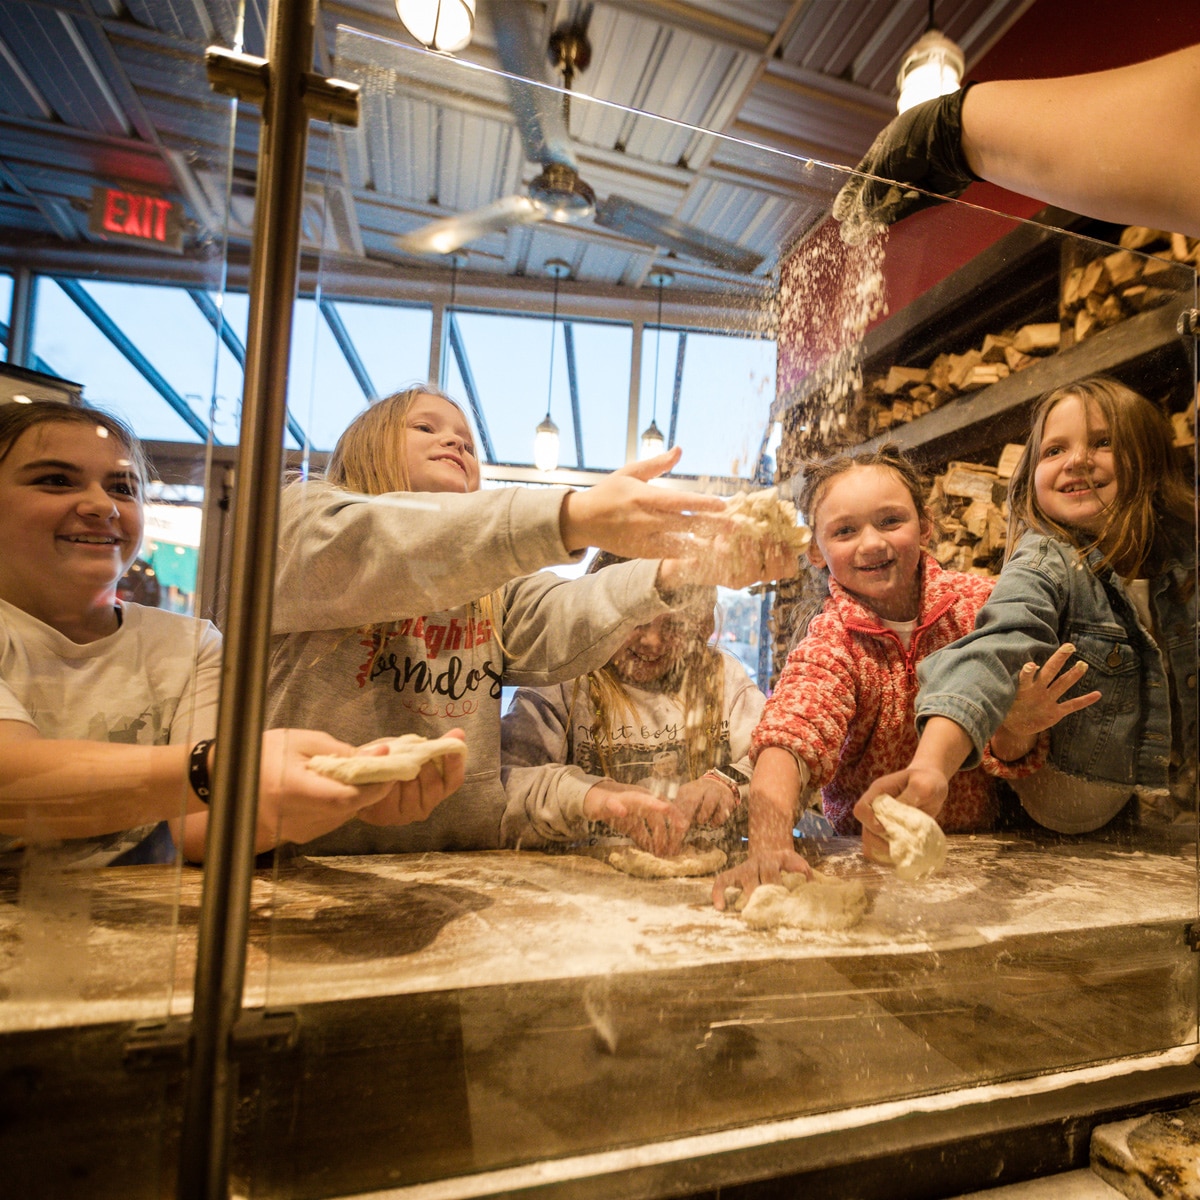 Kids Practice Tossing Pizza Dough at Hard Knox on Kids Eat Free Night